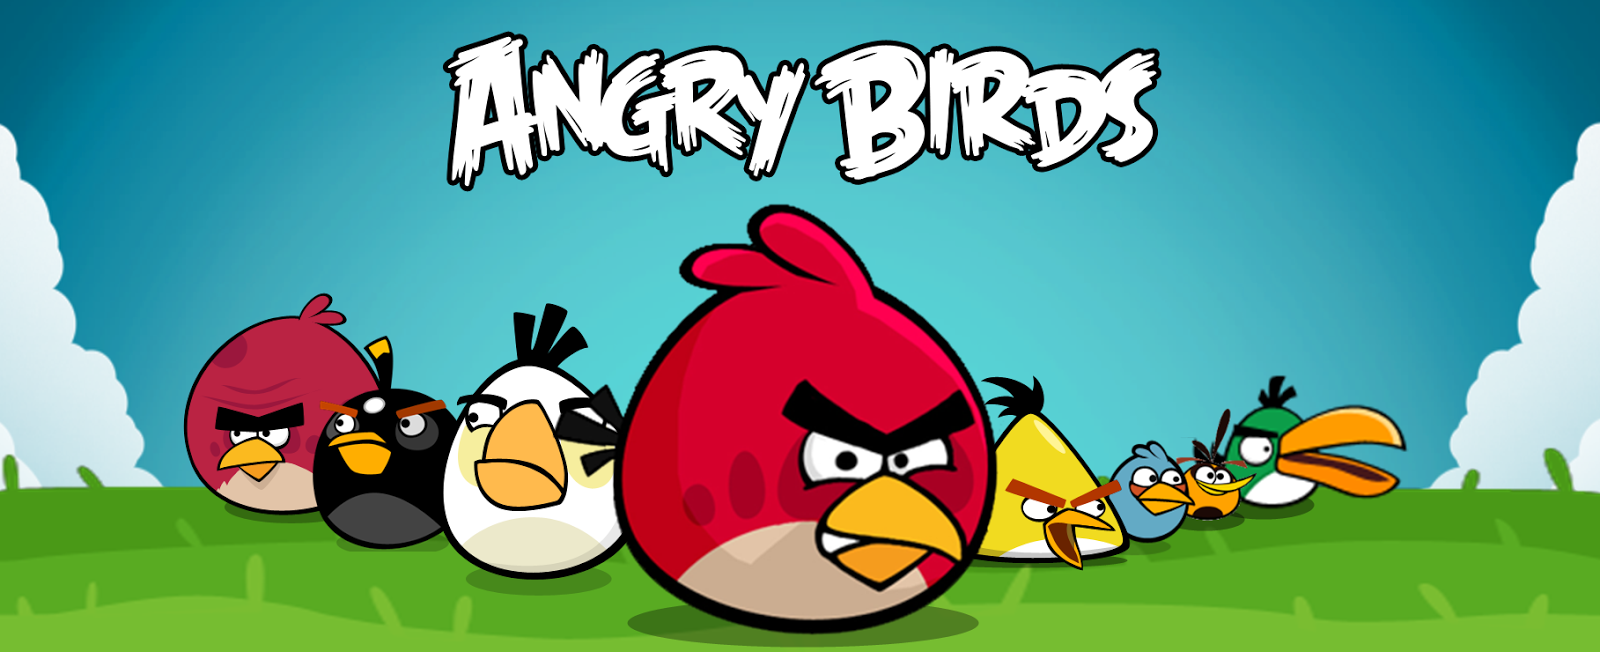 Movie News: Angry Birds crashing into theaters in 2016